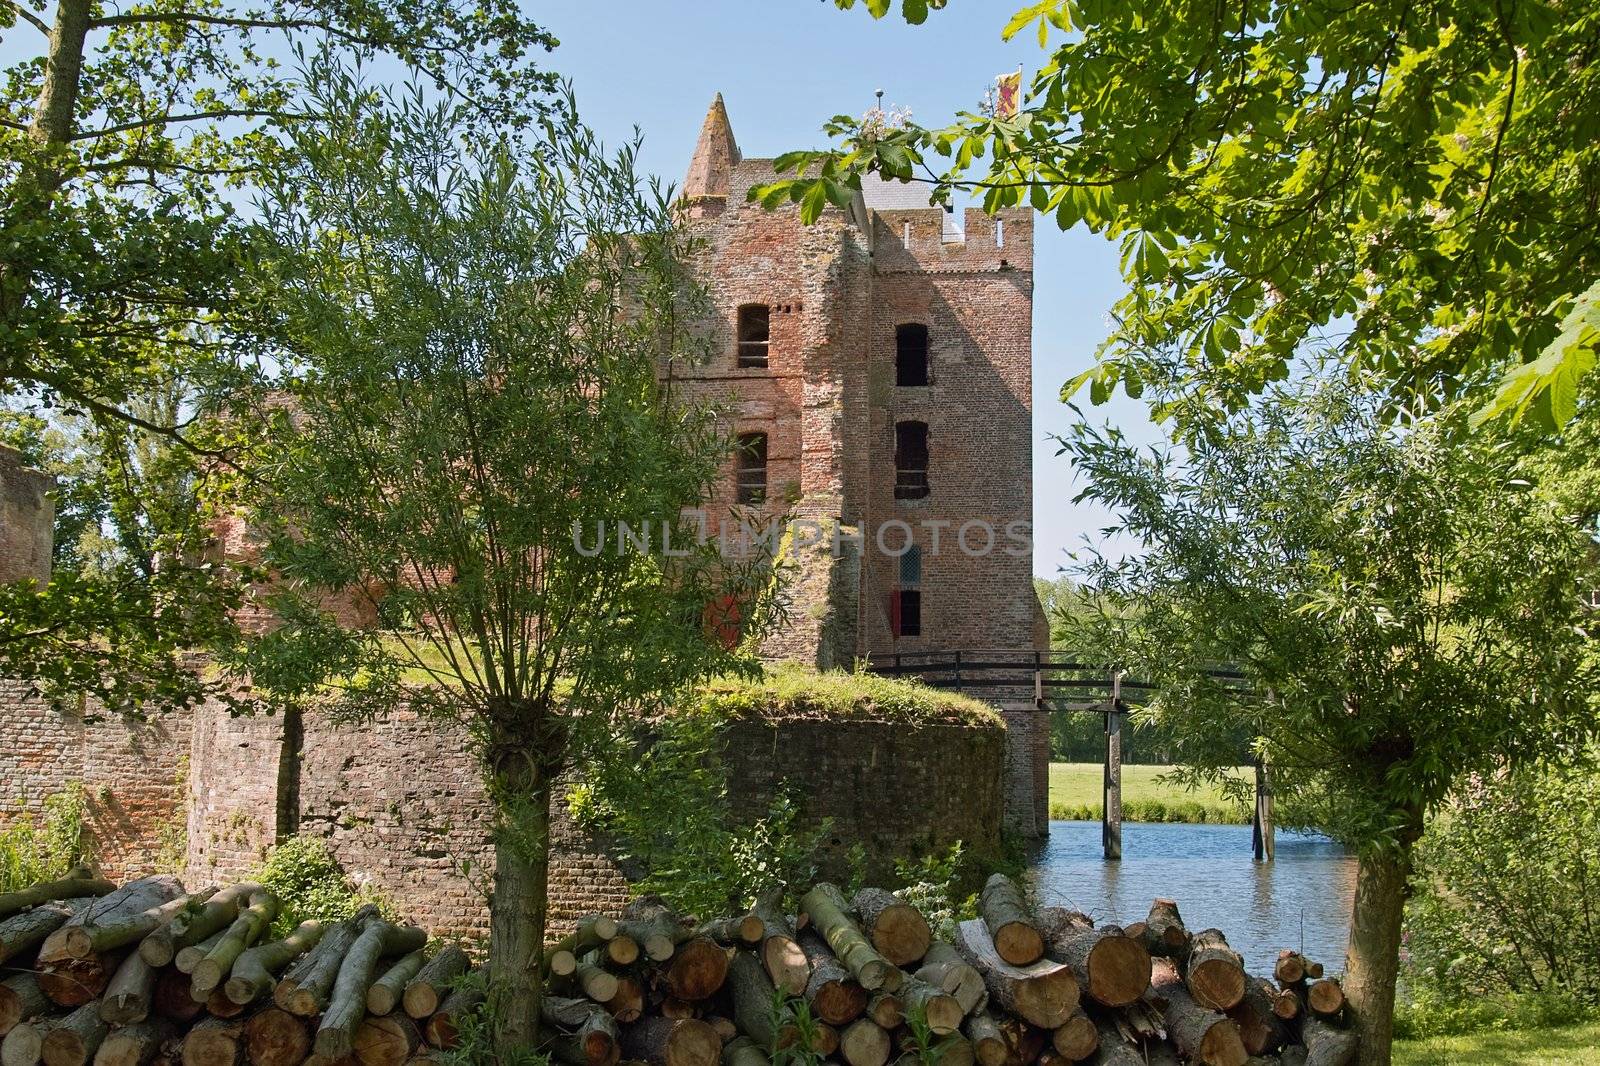 The Ruins of Brederode, once a stronghold, nowadays a peaceful landmark in a pittoresque surrounding.